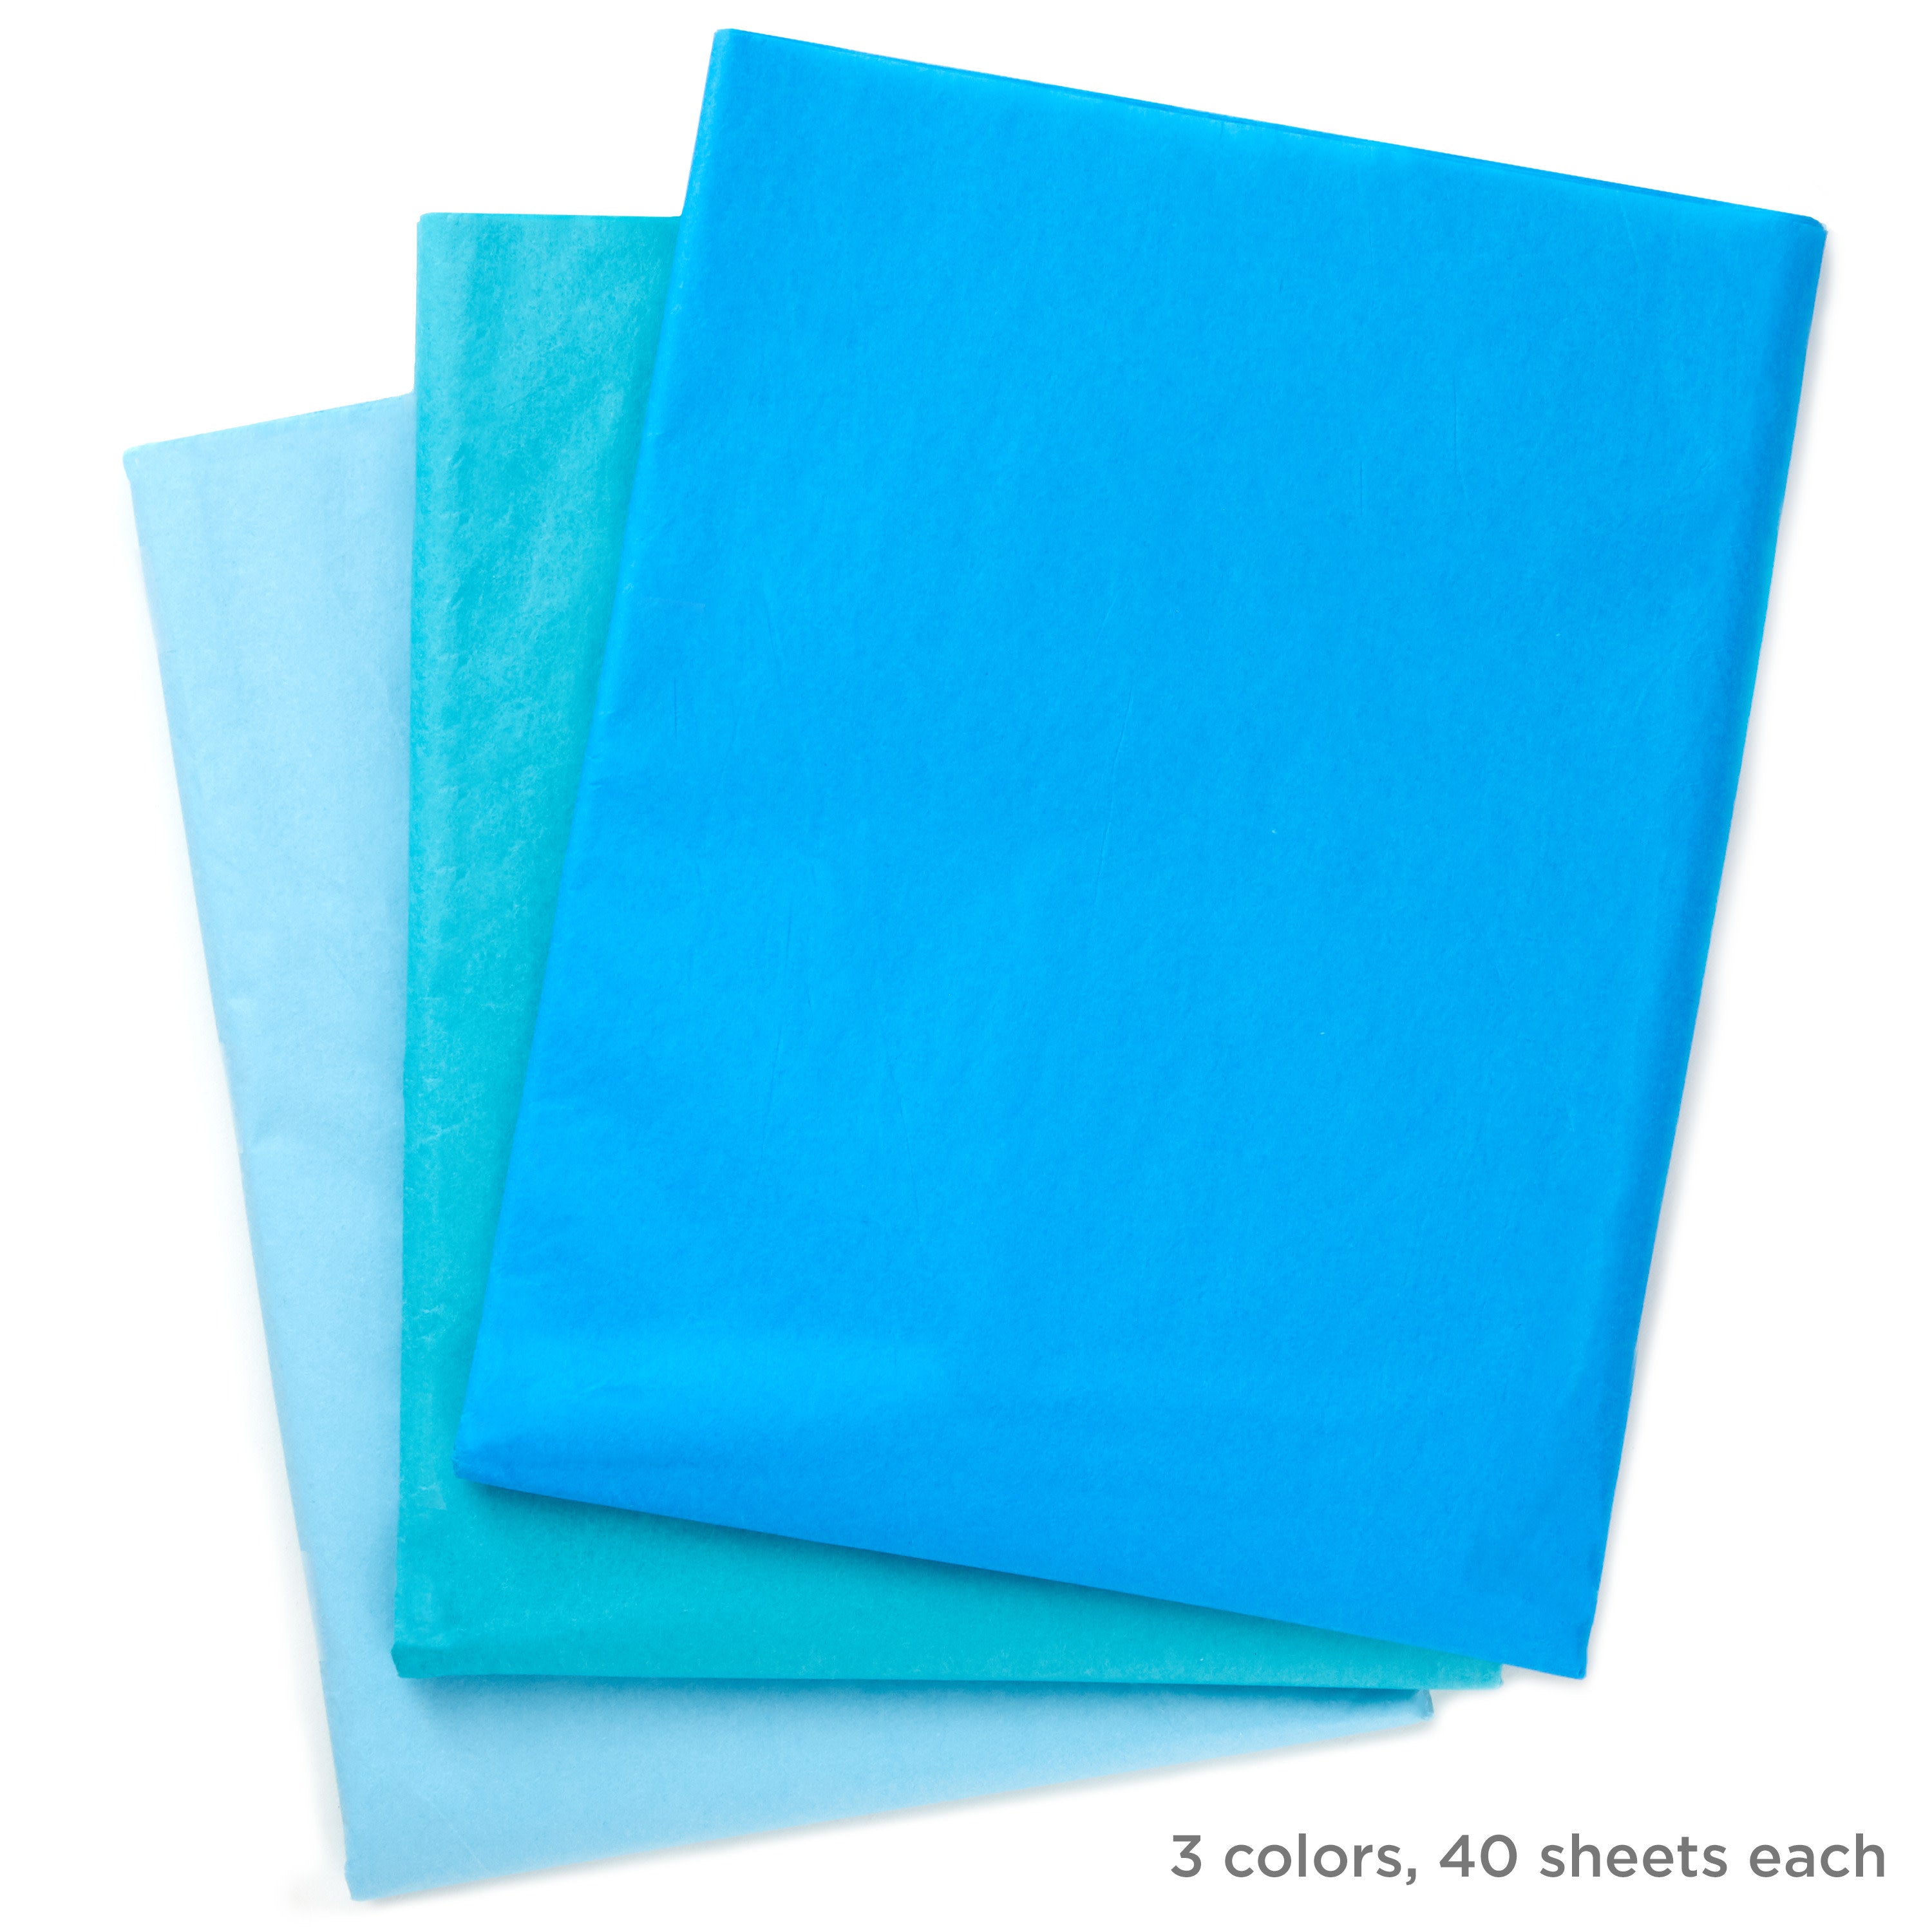 Hallmark Royal Blue, Turquoise and Light Blue Bulk Tissue Paper (90 Sheets) for Birthdays, Hanukkah, Father's Day, Baby Showers, Graduations